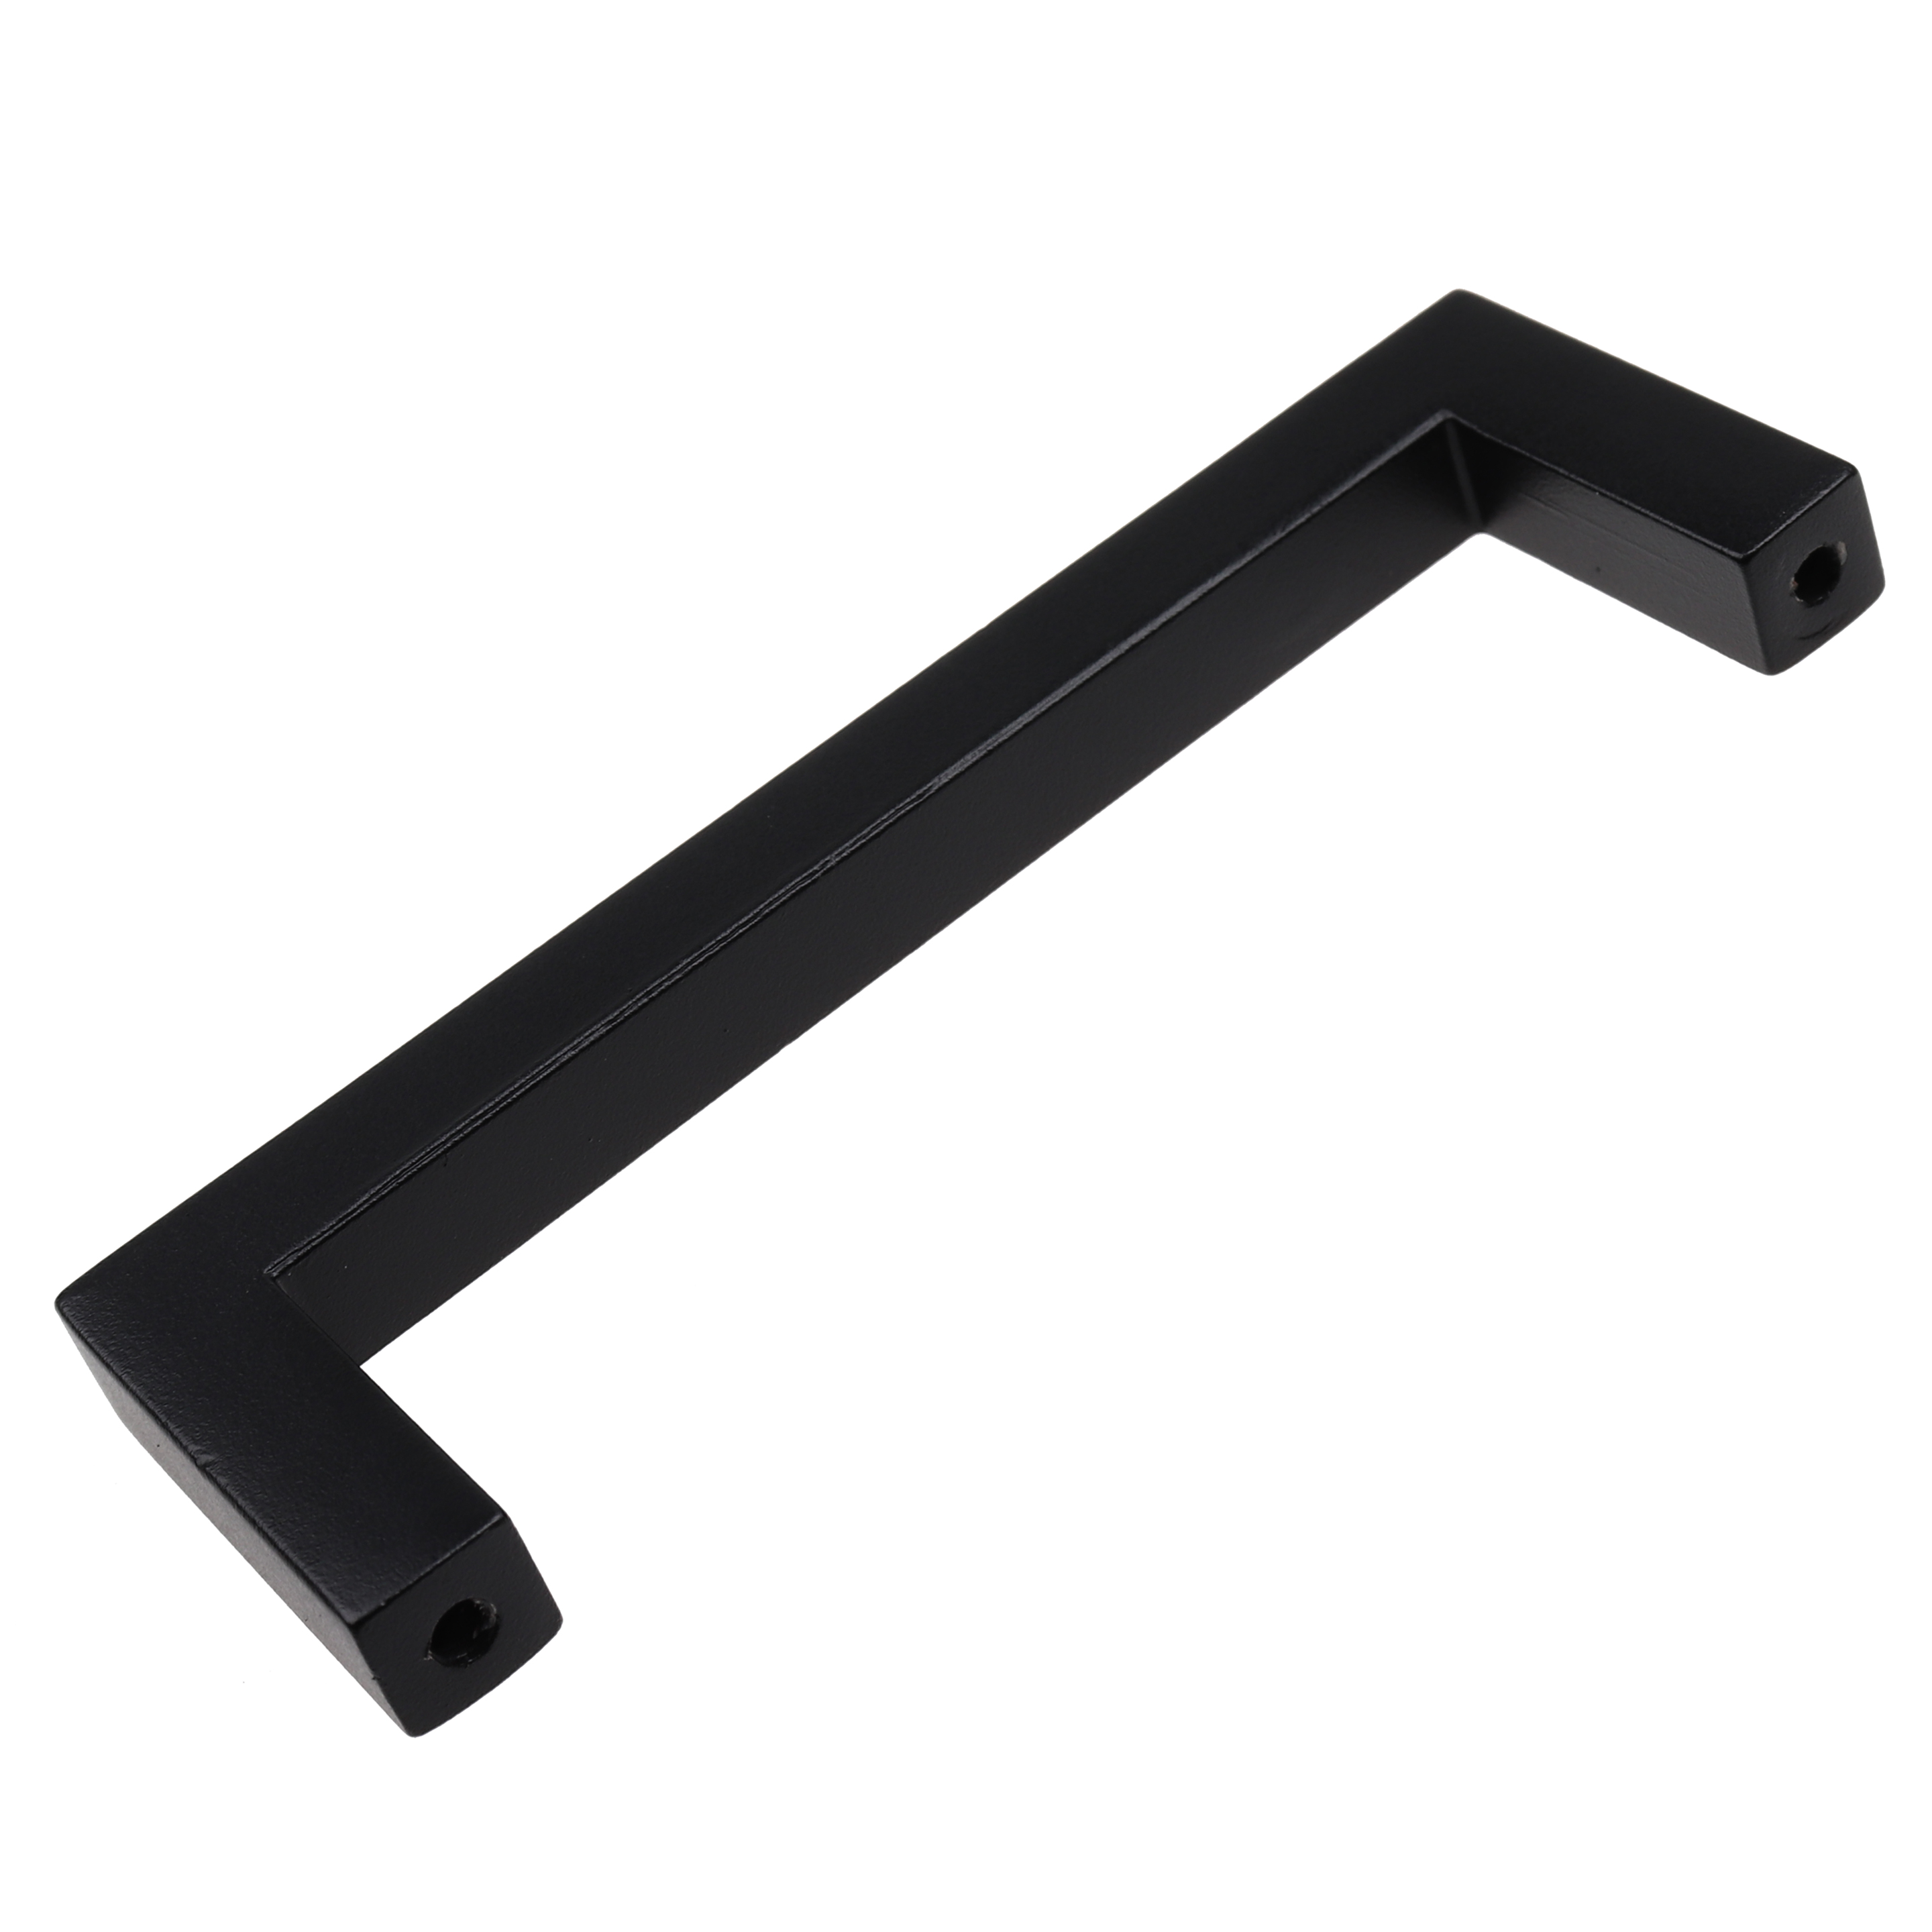 GlideRite 3-3/4 in. Center Solid Square Bar Pull Cabinet Hardware Handles, Matte Black, Pack of 25 - image 2 of 5